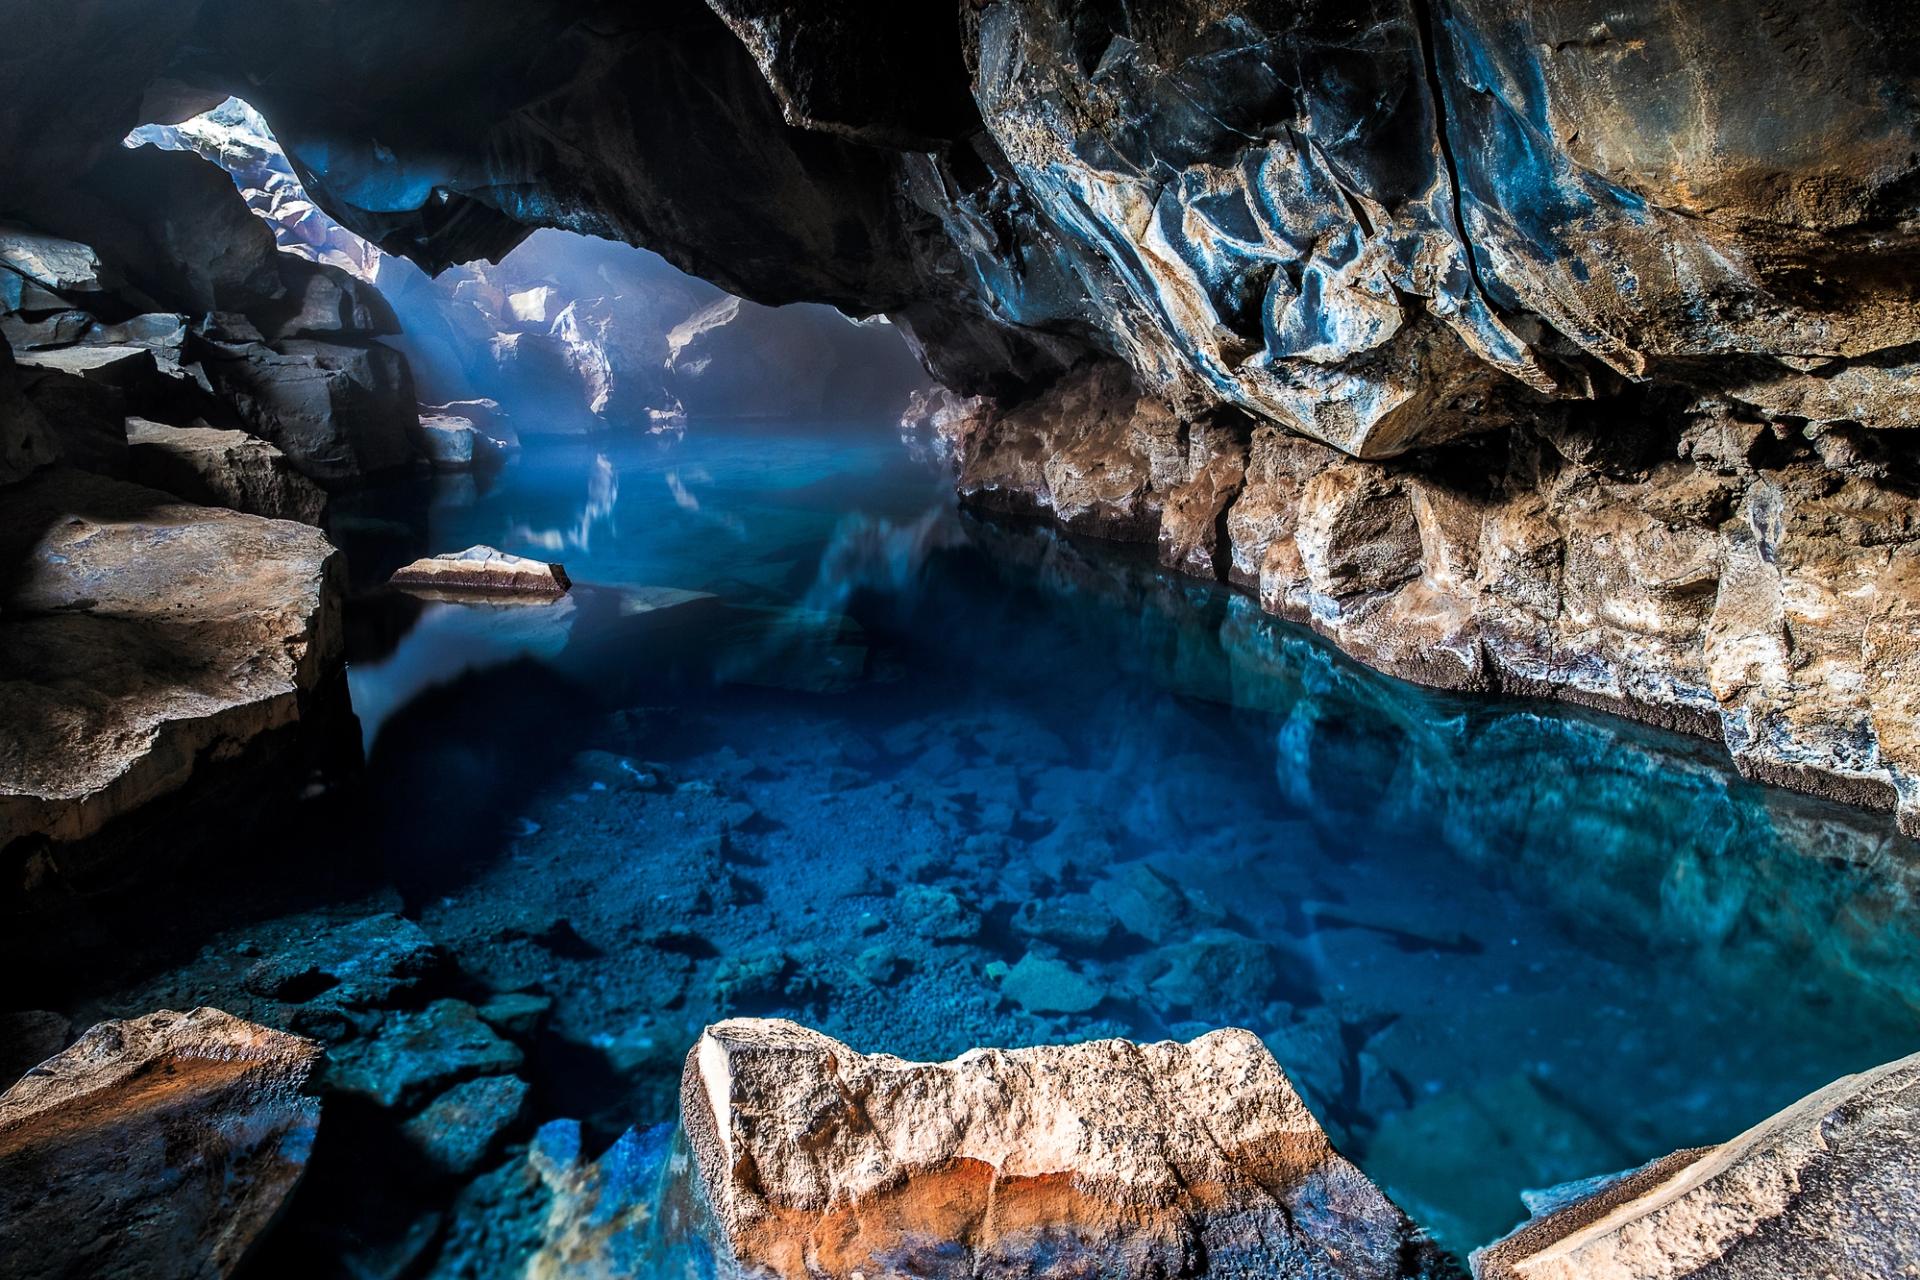 Picture of the Grjotagja volcanic Cave, with hot blue thermal water